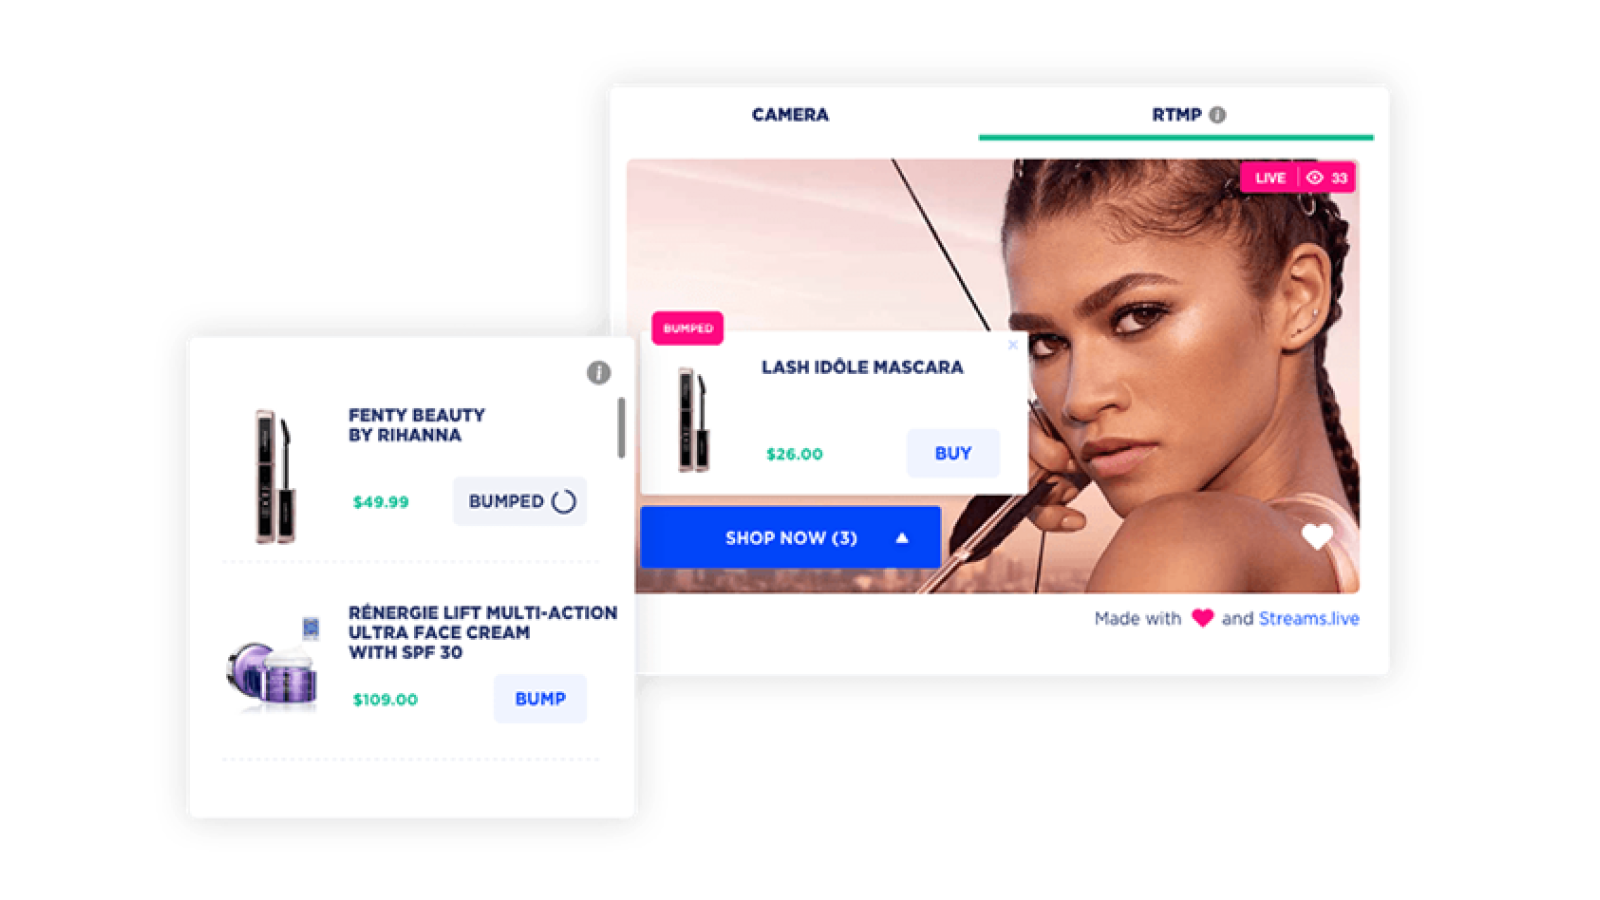 highlight products and increase the conversion rate